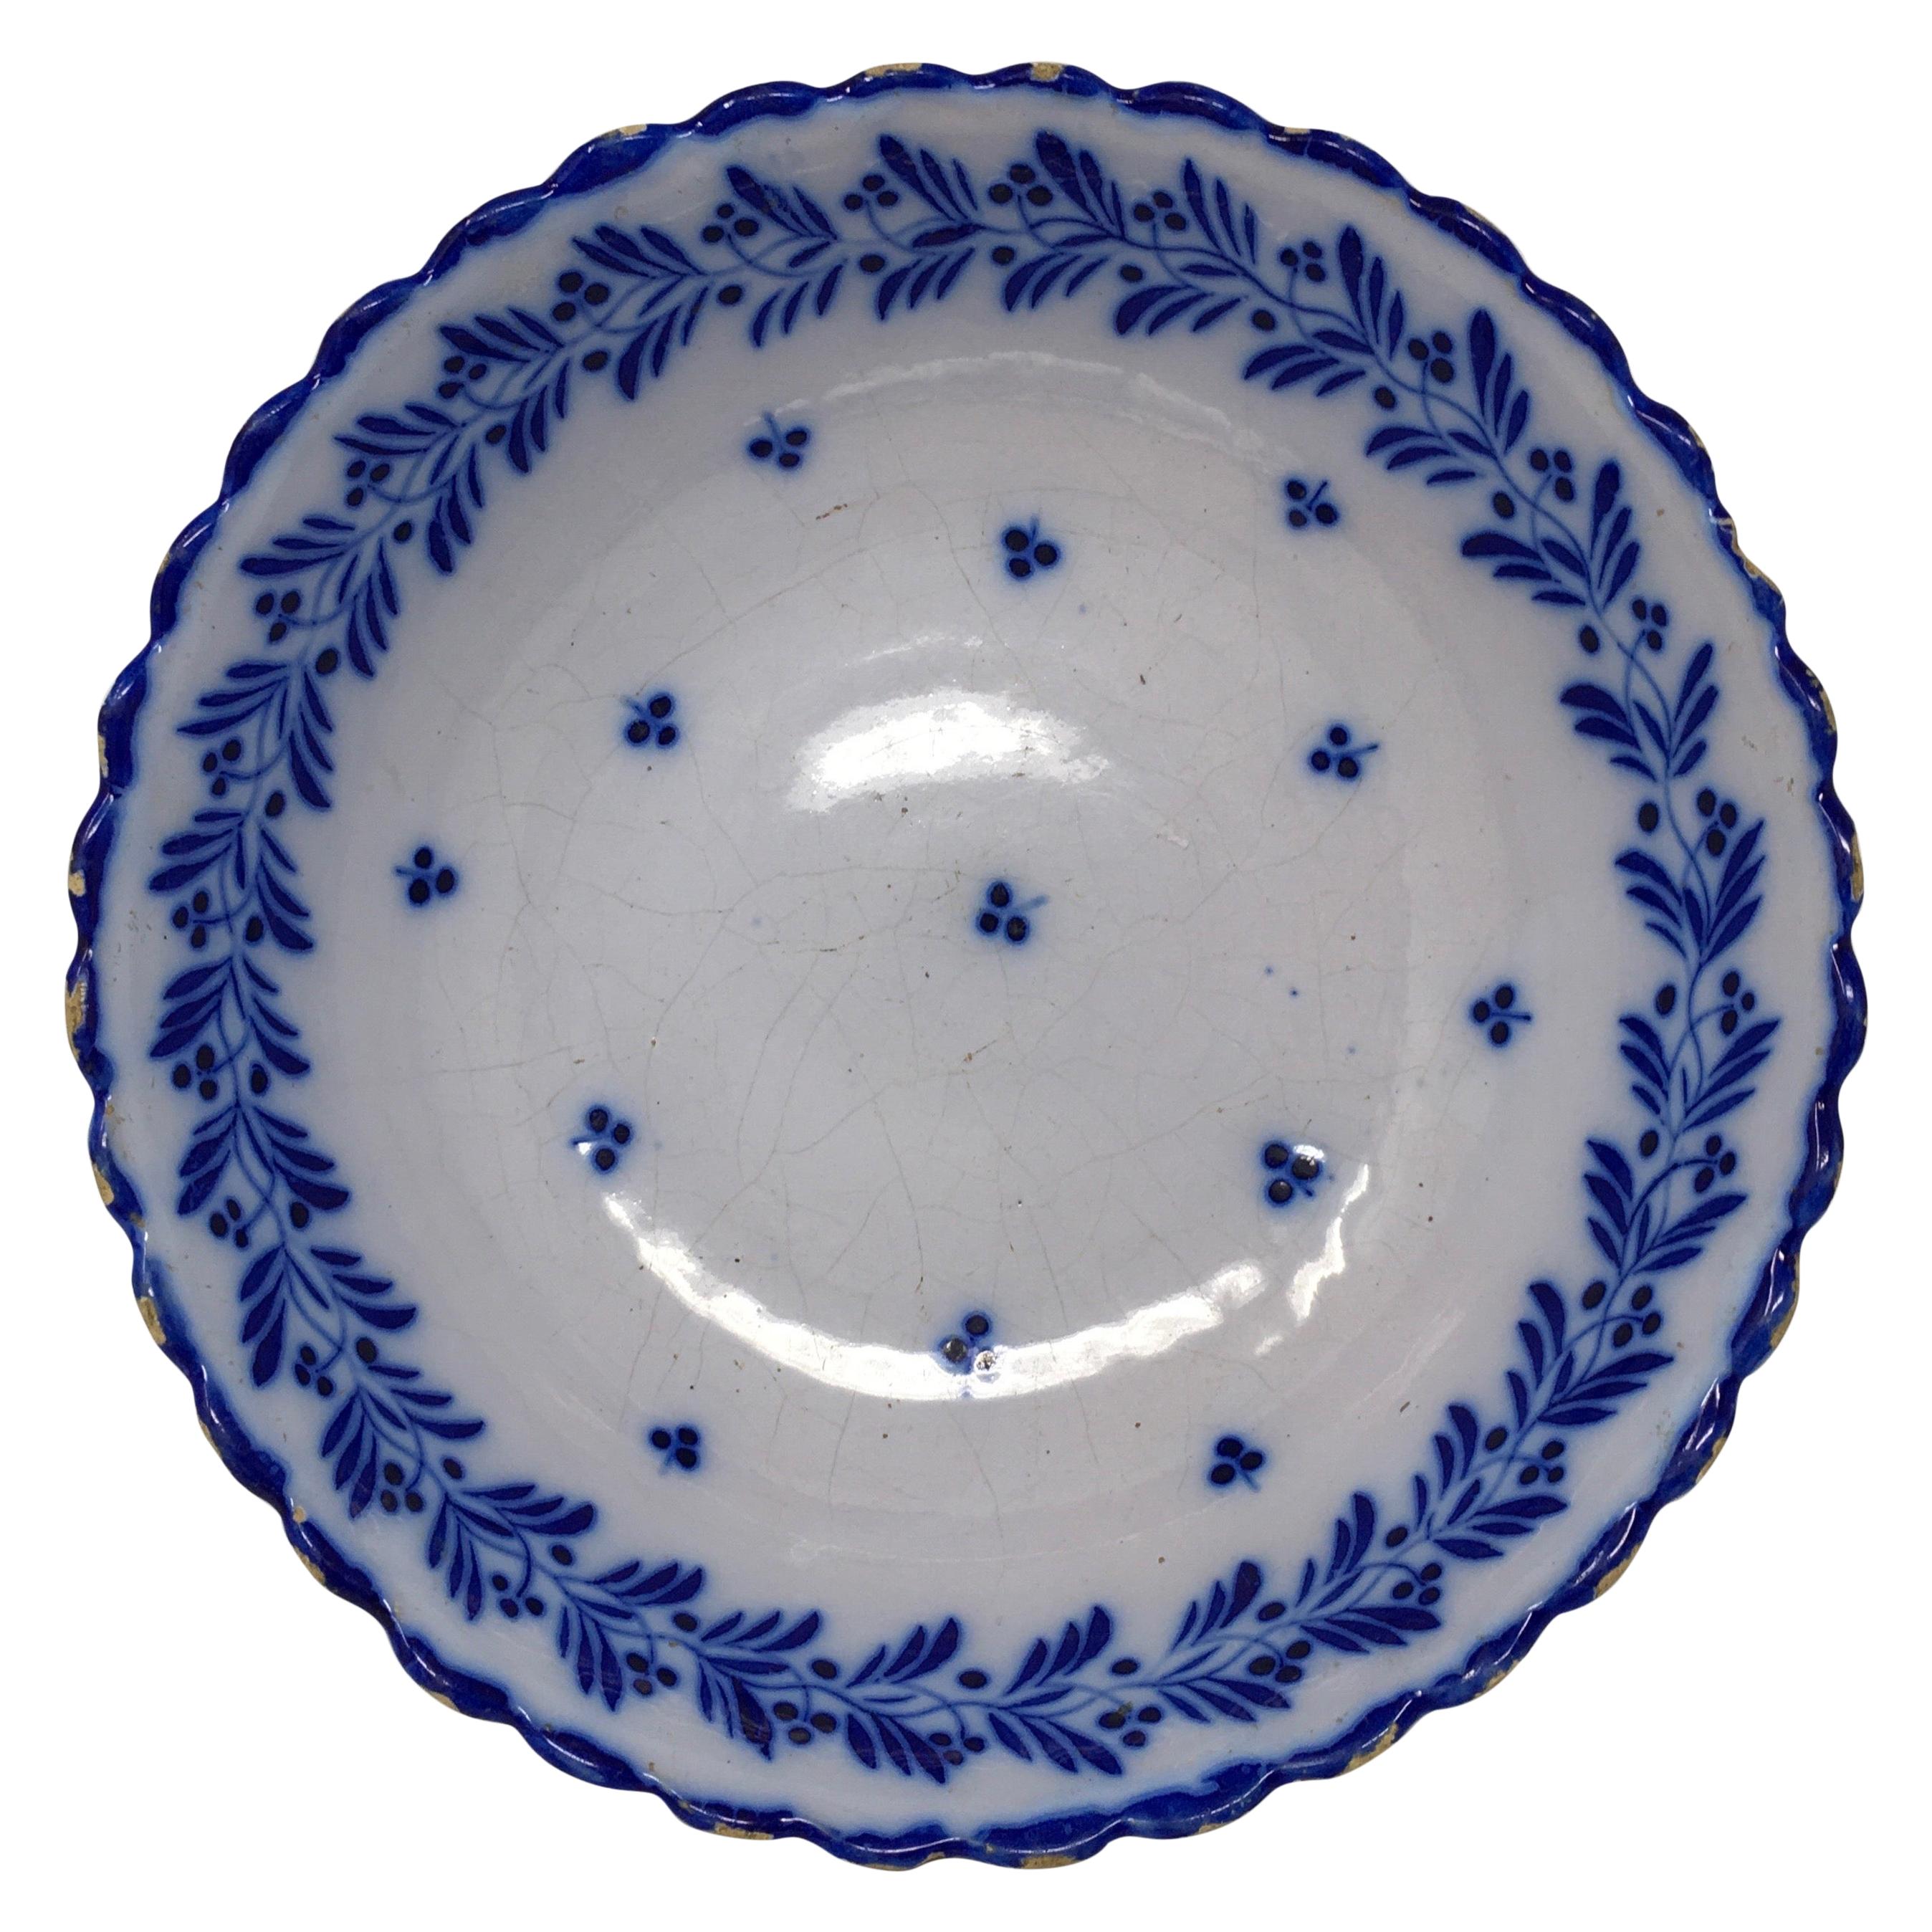 Painted Blue Bowl